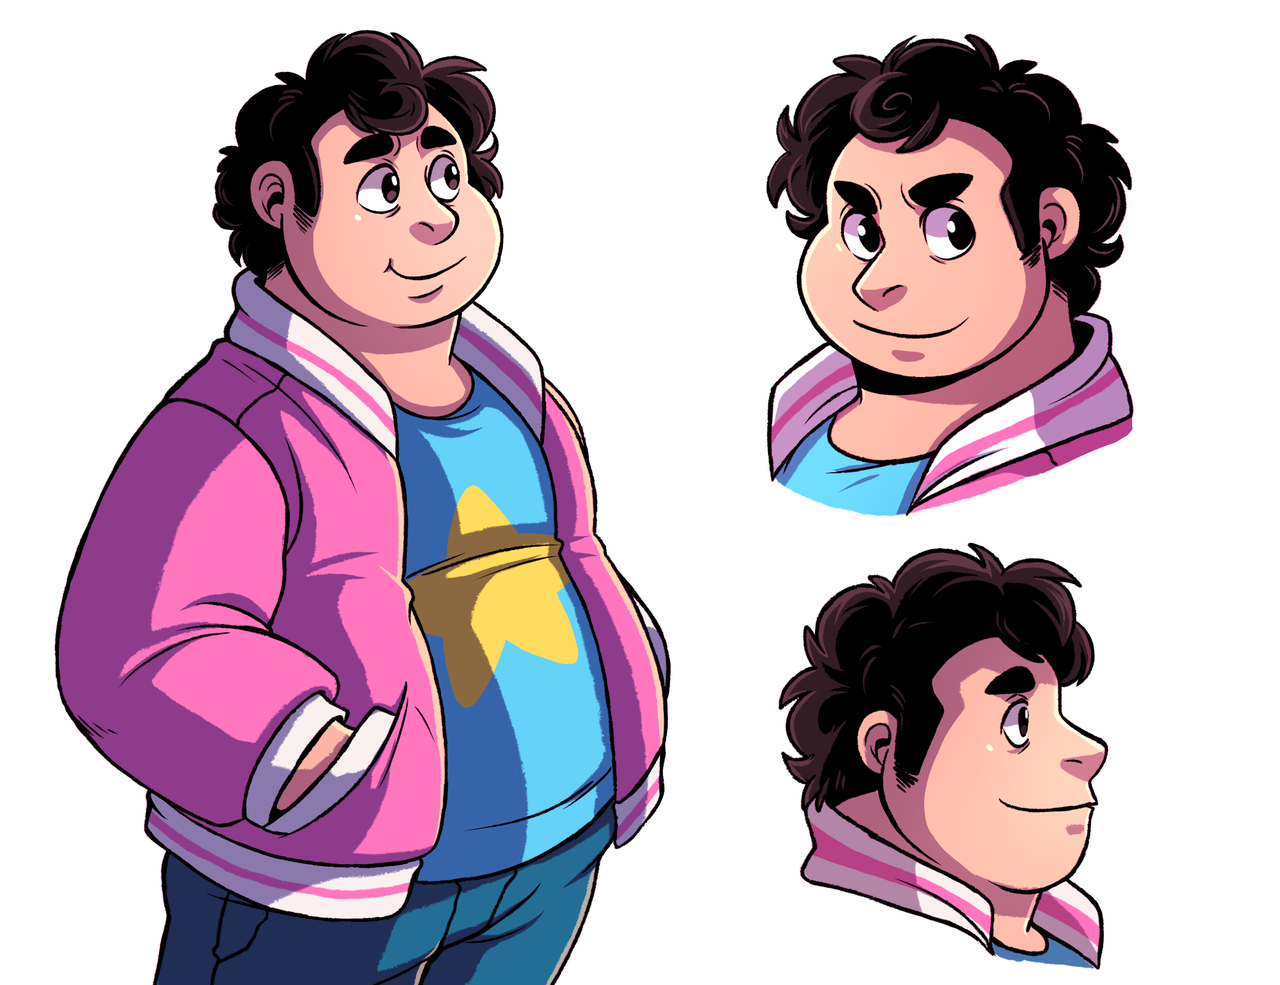 Steven has a neck now!!!!!!! I had to celebrate it